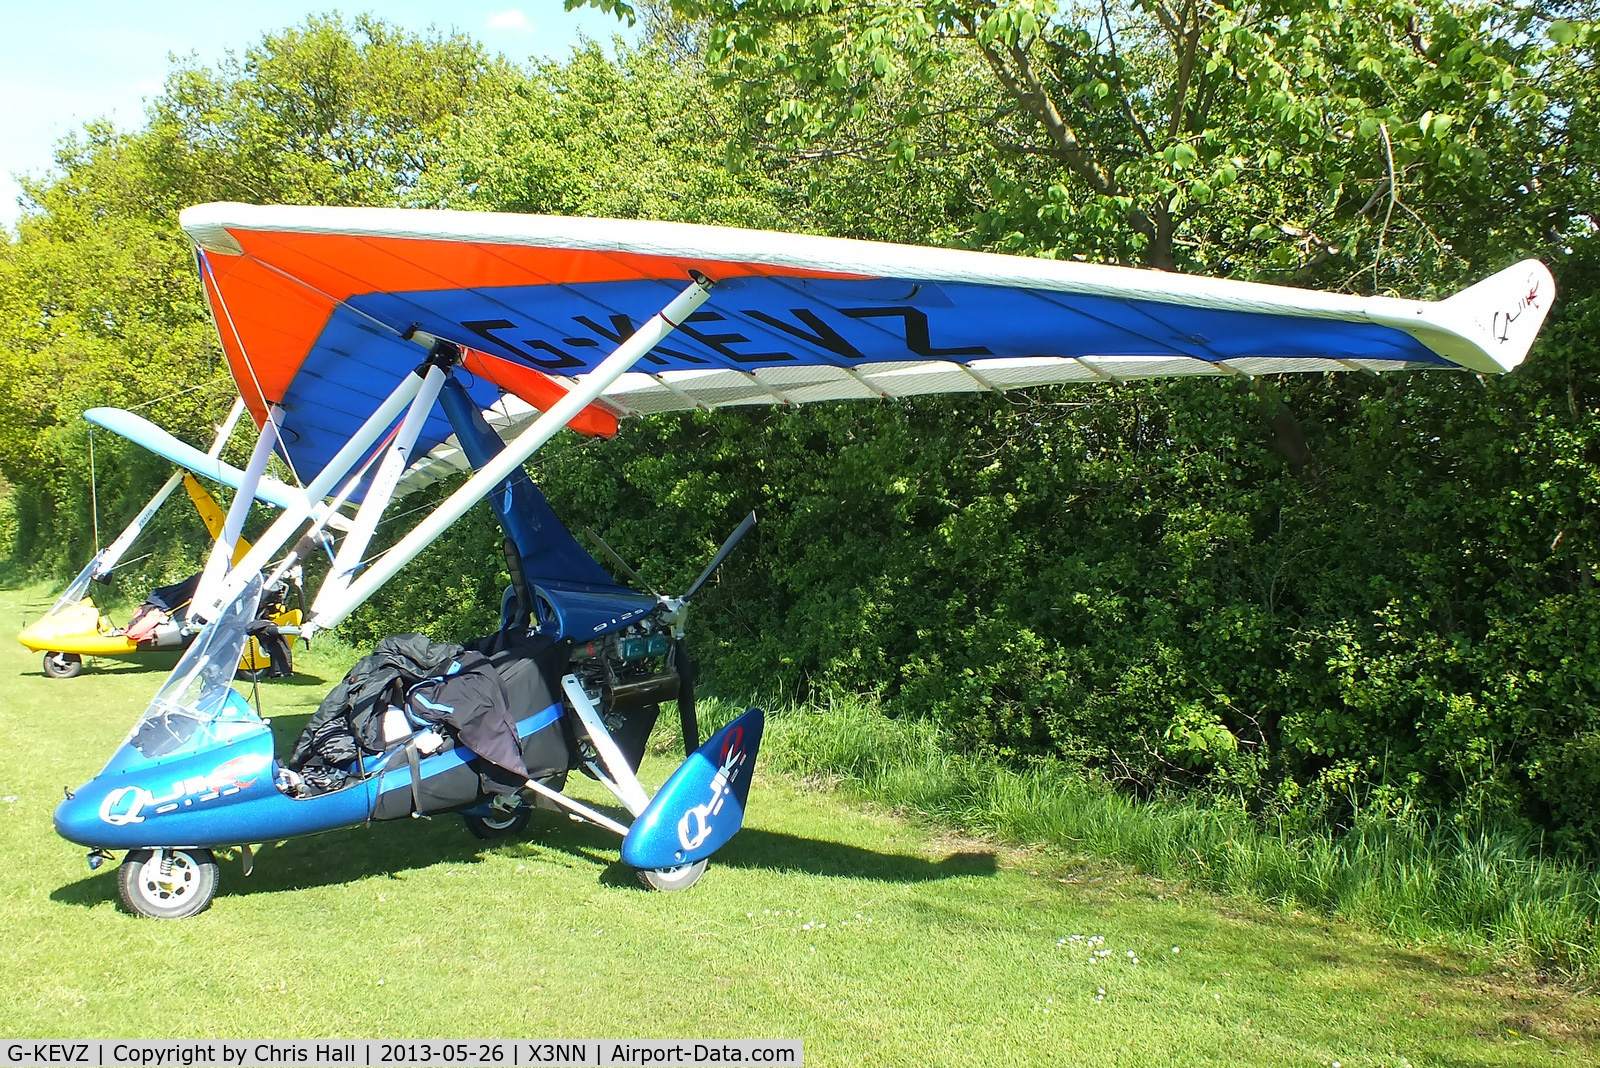 G-KEVZ, 2011 P&M Aviation QuikR C/N 8598, visitor to Stoke Golding airfield